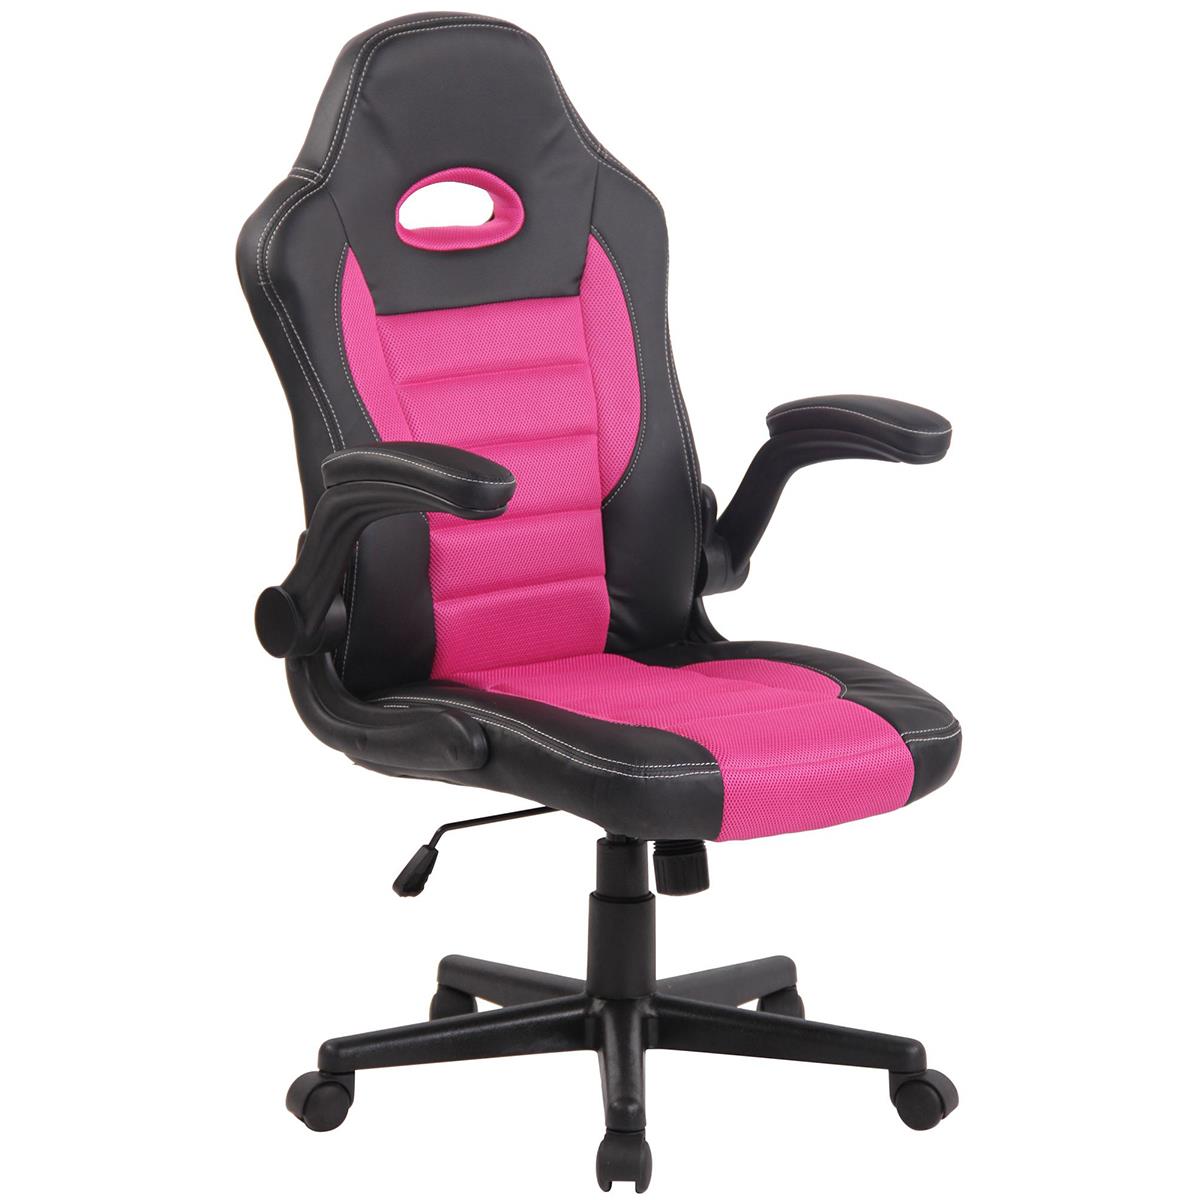 Chaise Gamer LOTUS, accoudoirs relevables, cuir et maille respirable, rose